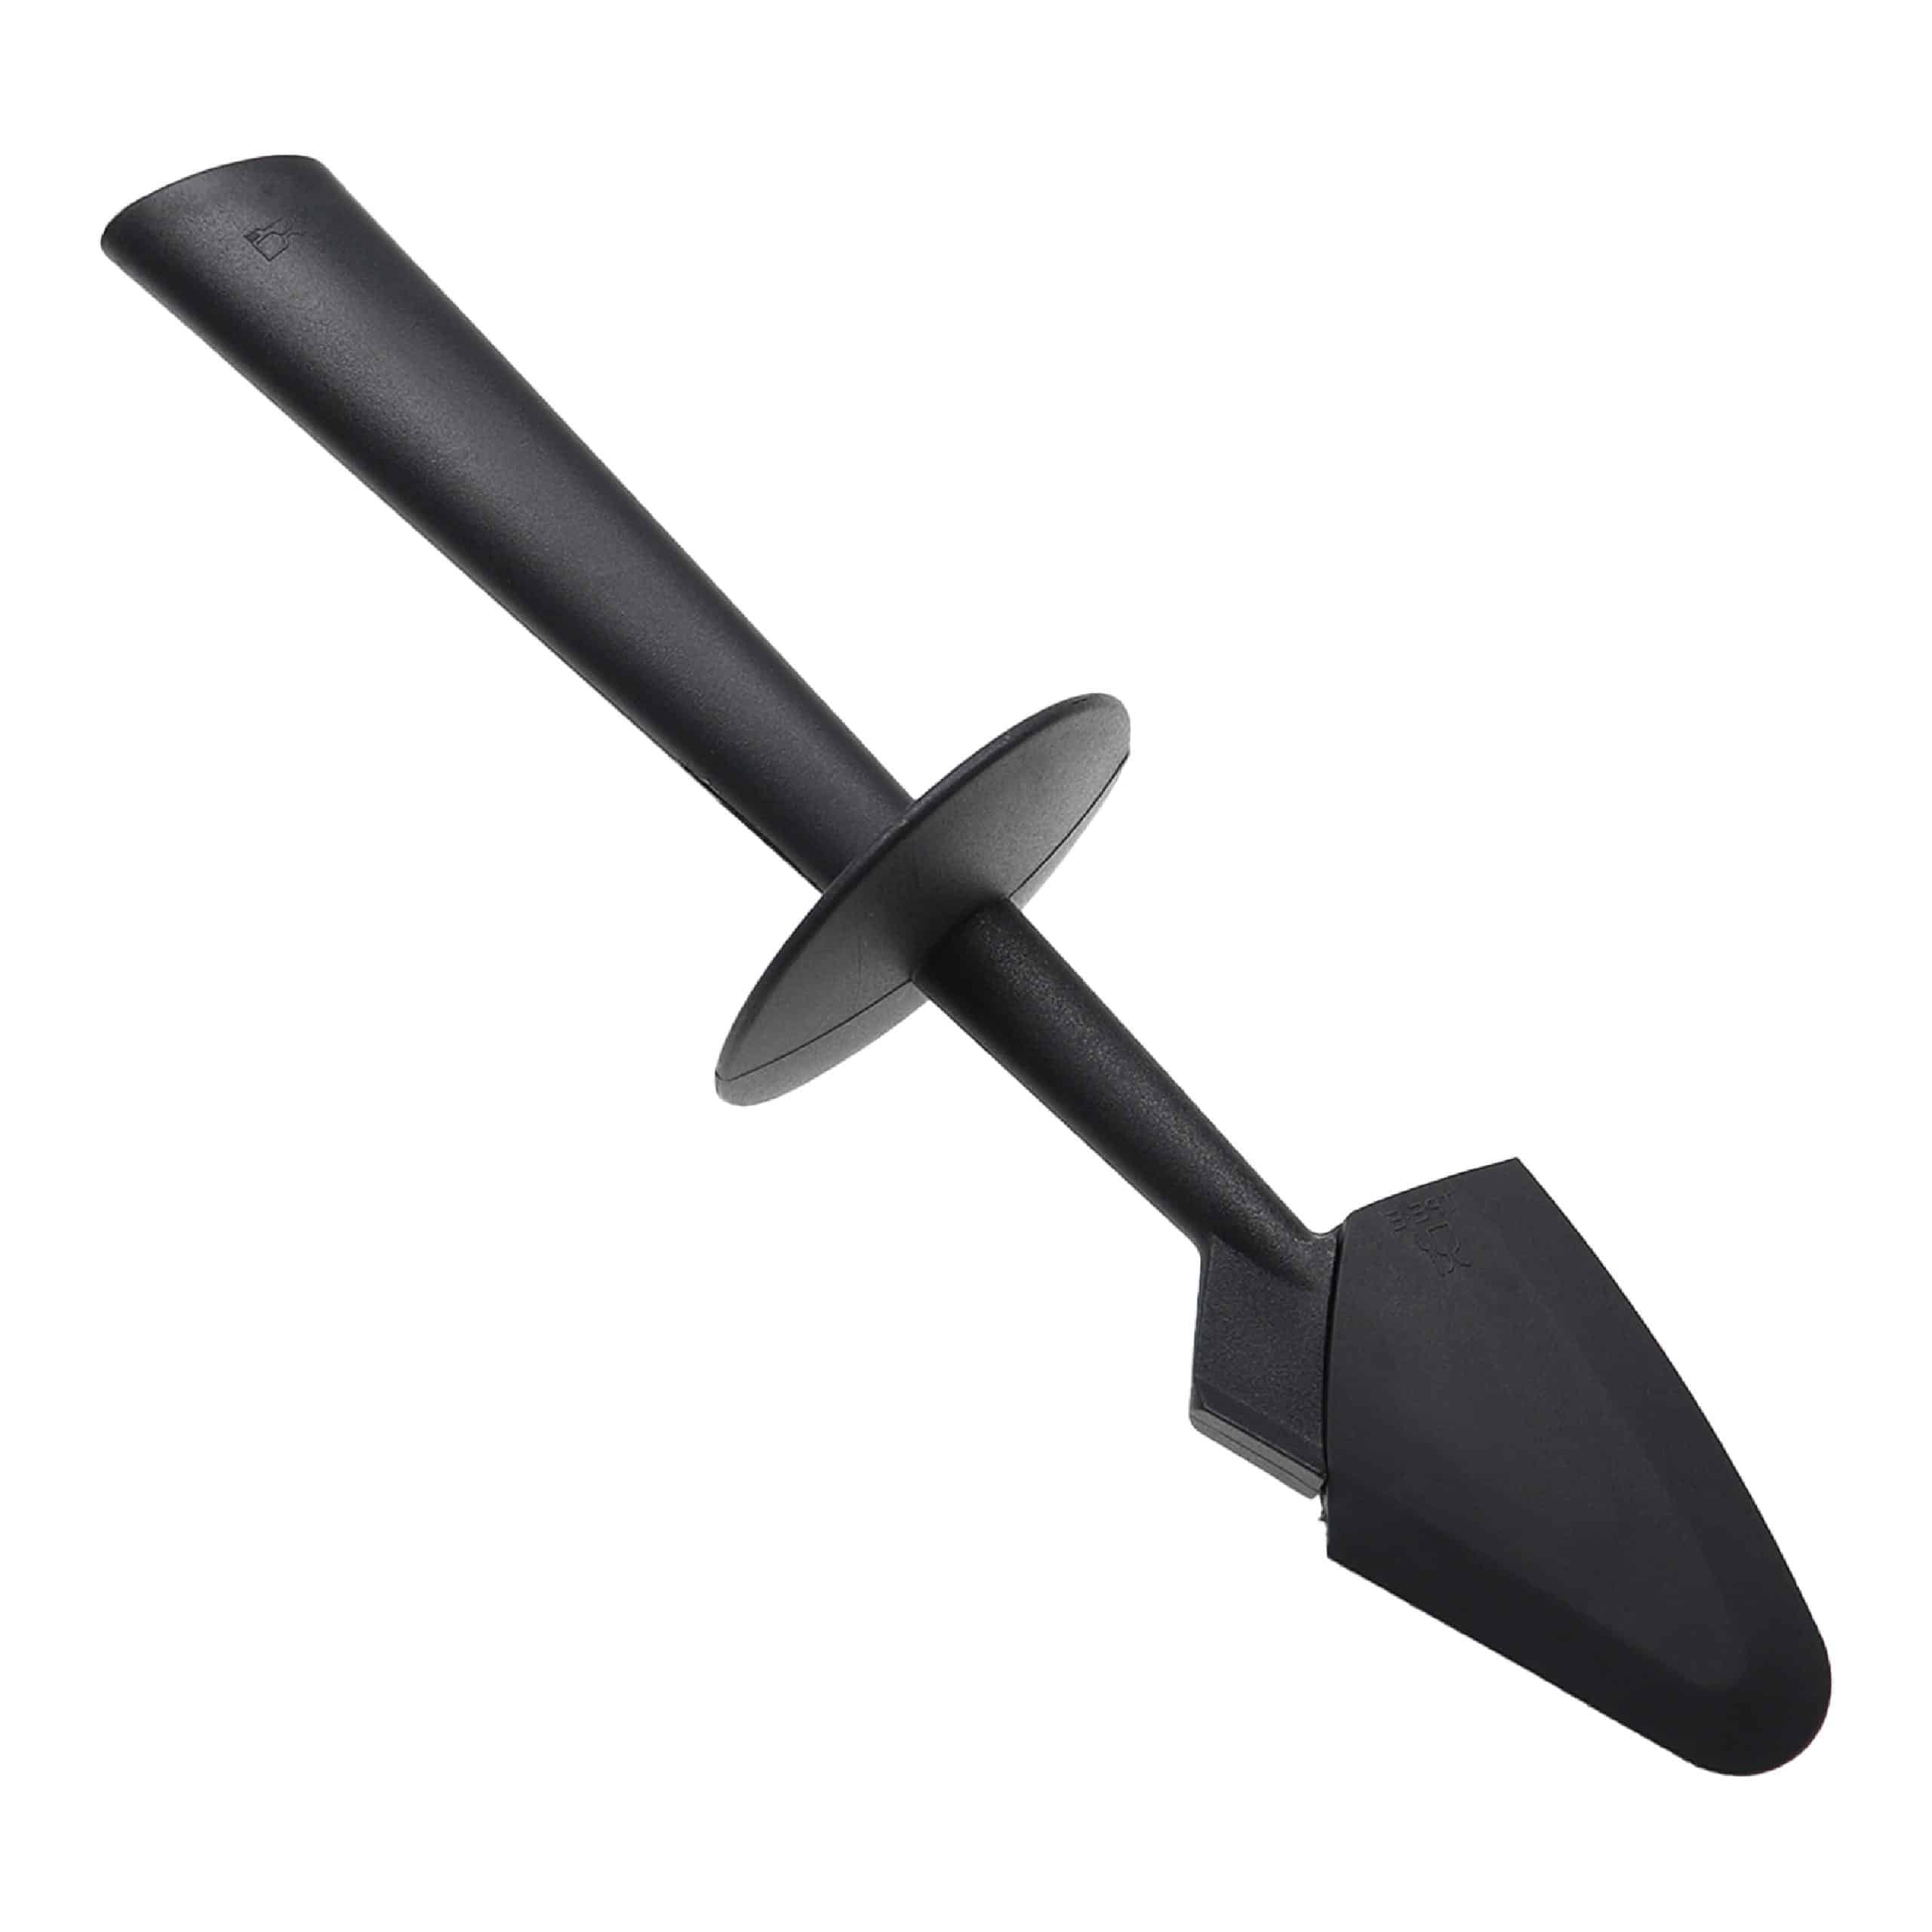 Spatula suitable for Vorwerk Thermomix TM21 Kitchen Mixer, Food Processor - Rotary Mixing Scraper